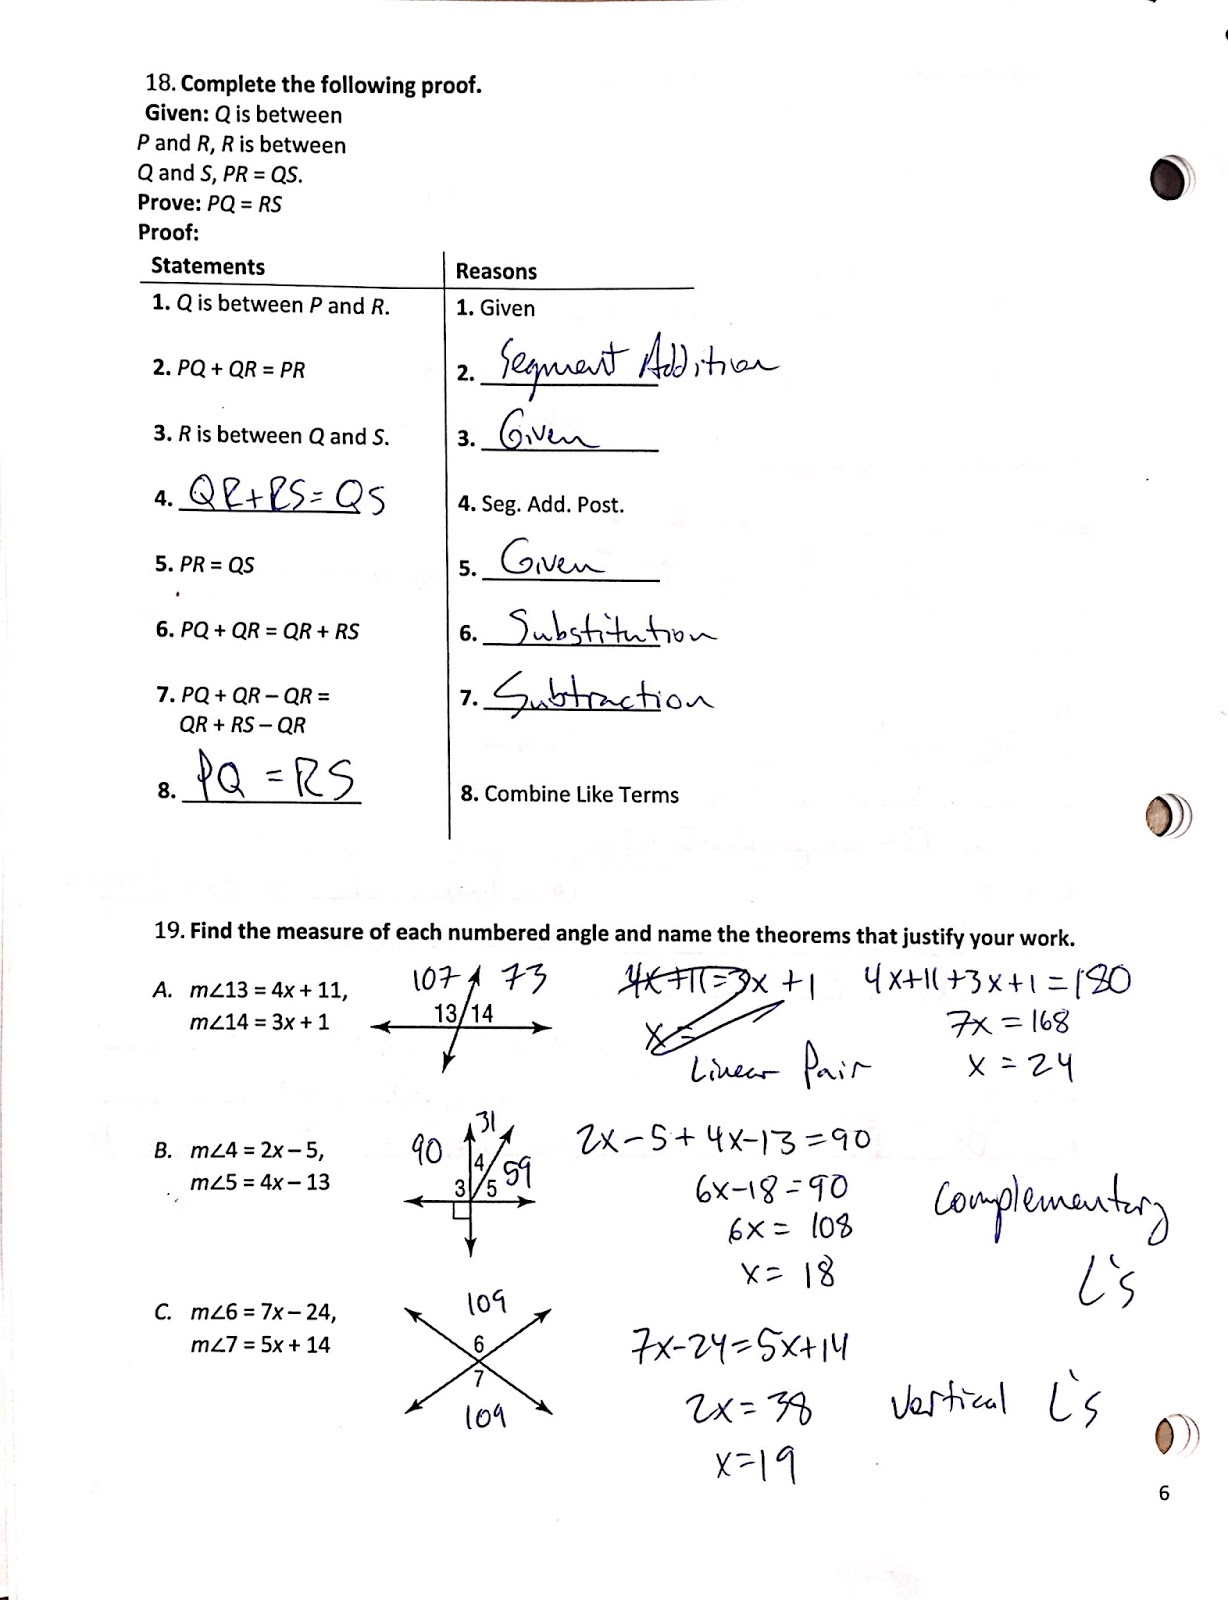 personal math trainer evaluate homework and practice answers geometry